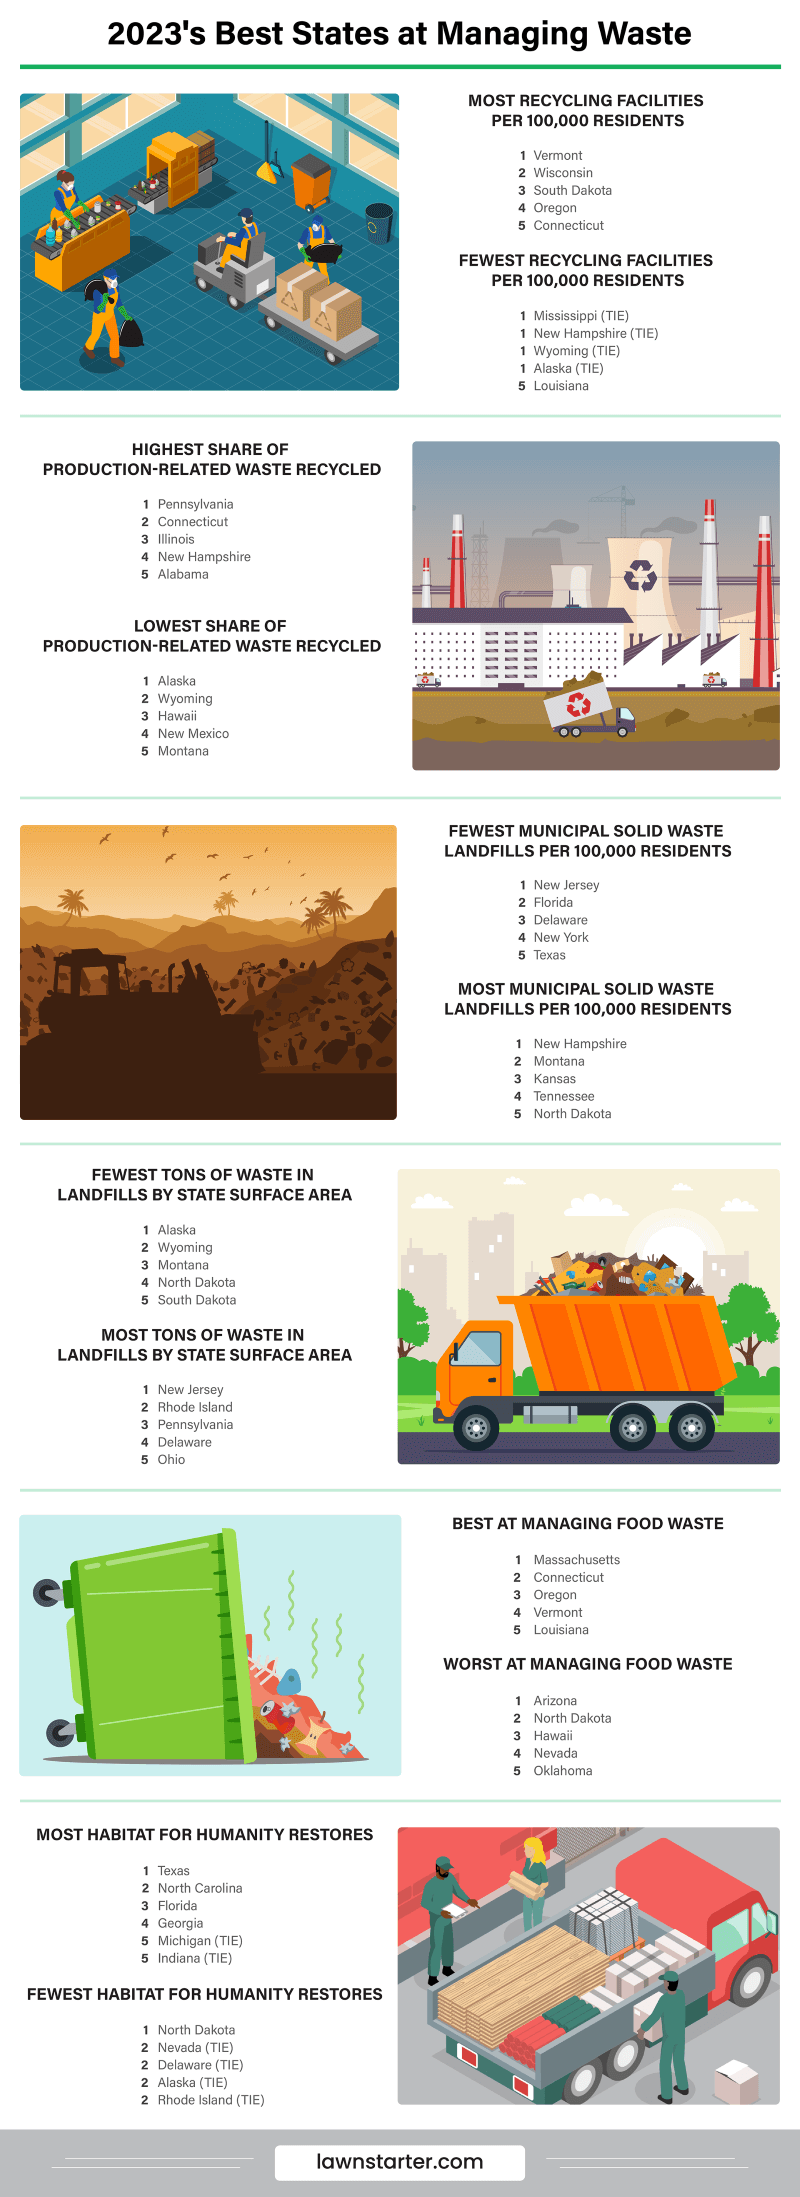 Infographic showing the Best States at Managing Waste, a ranking based on waste-management infrastructure, waste production, infrastructure, and recycling rates